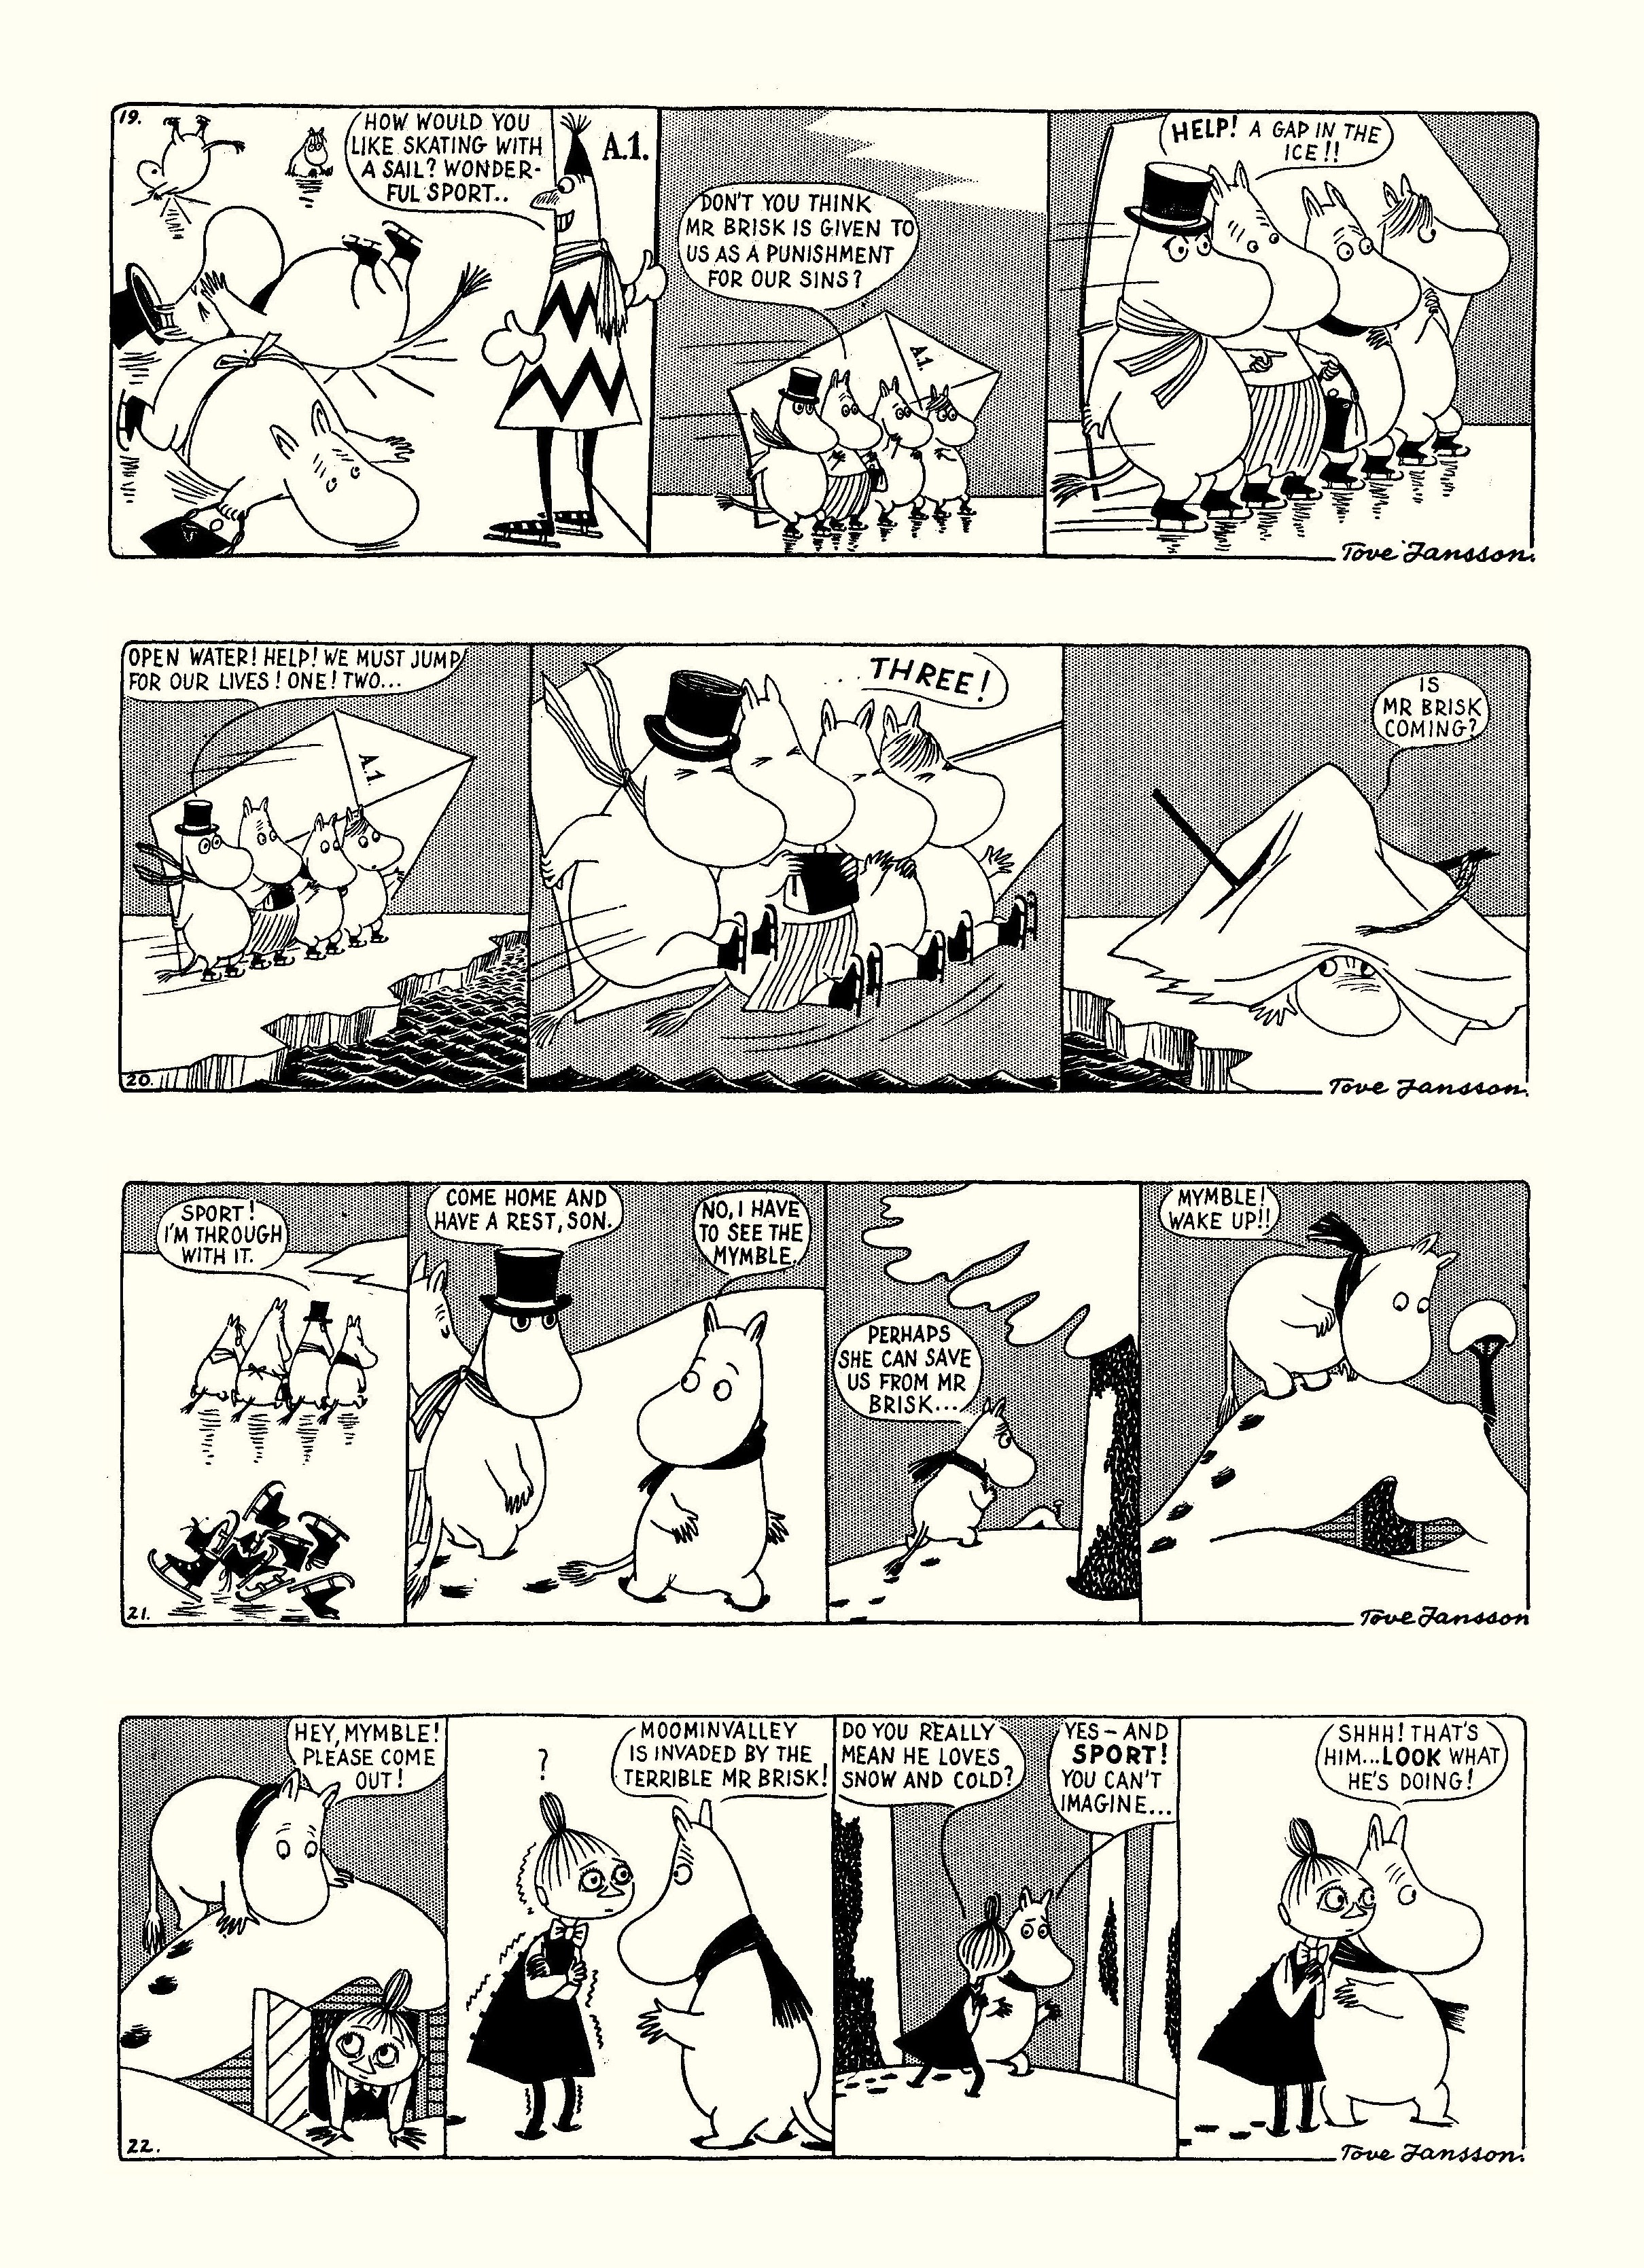 Read online Moomin: The Complete Tove Jansson Comic Strip comic -  Issue # TPB 2 - 11